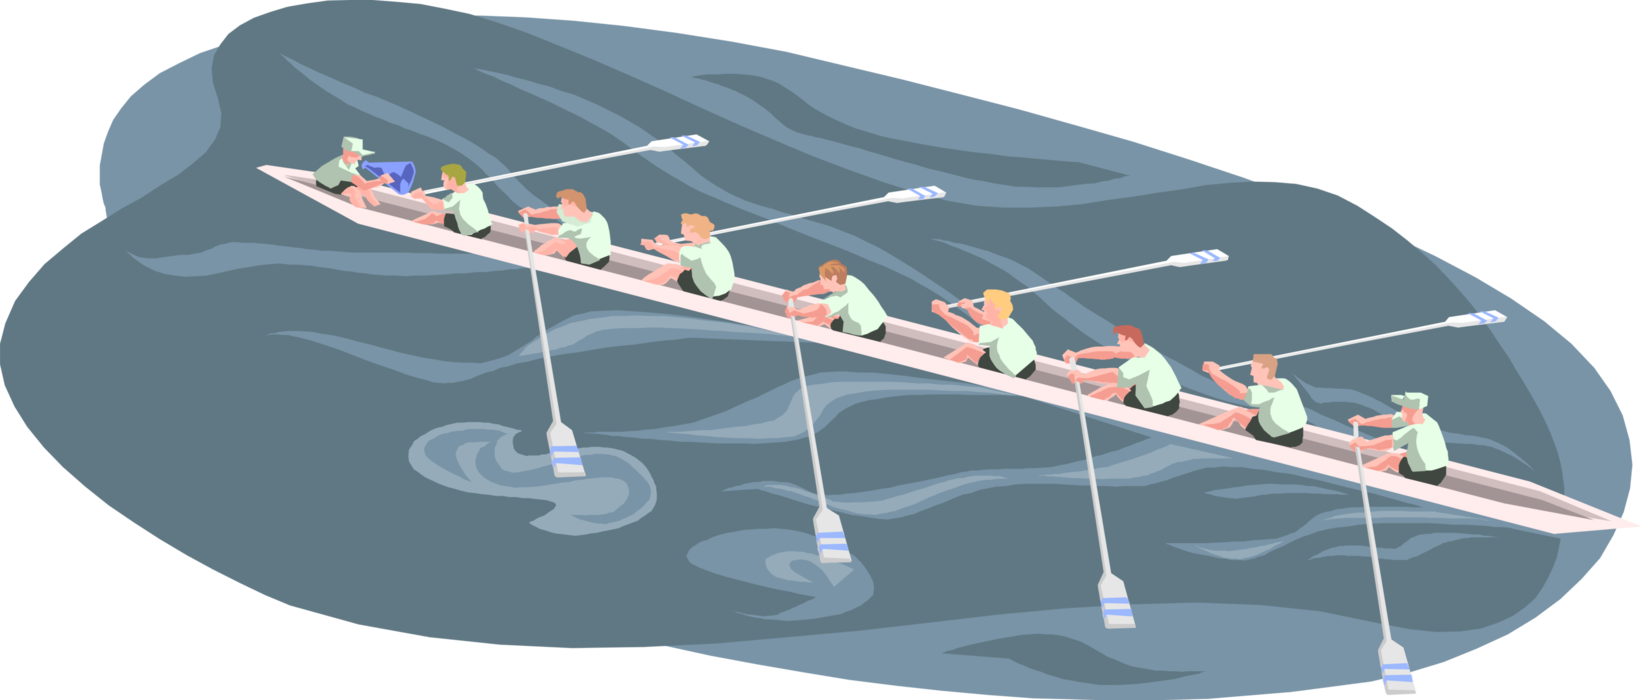 Vector Illustration of Competitive Sculling Rowing Team in 8-Person Shell Boat with Coxswain